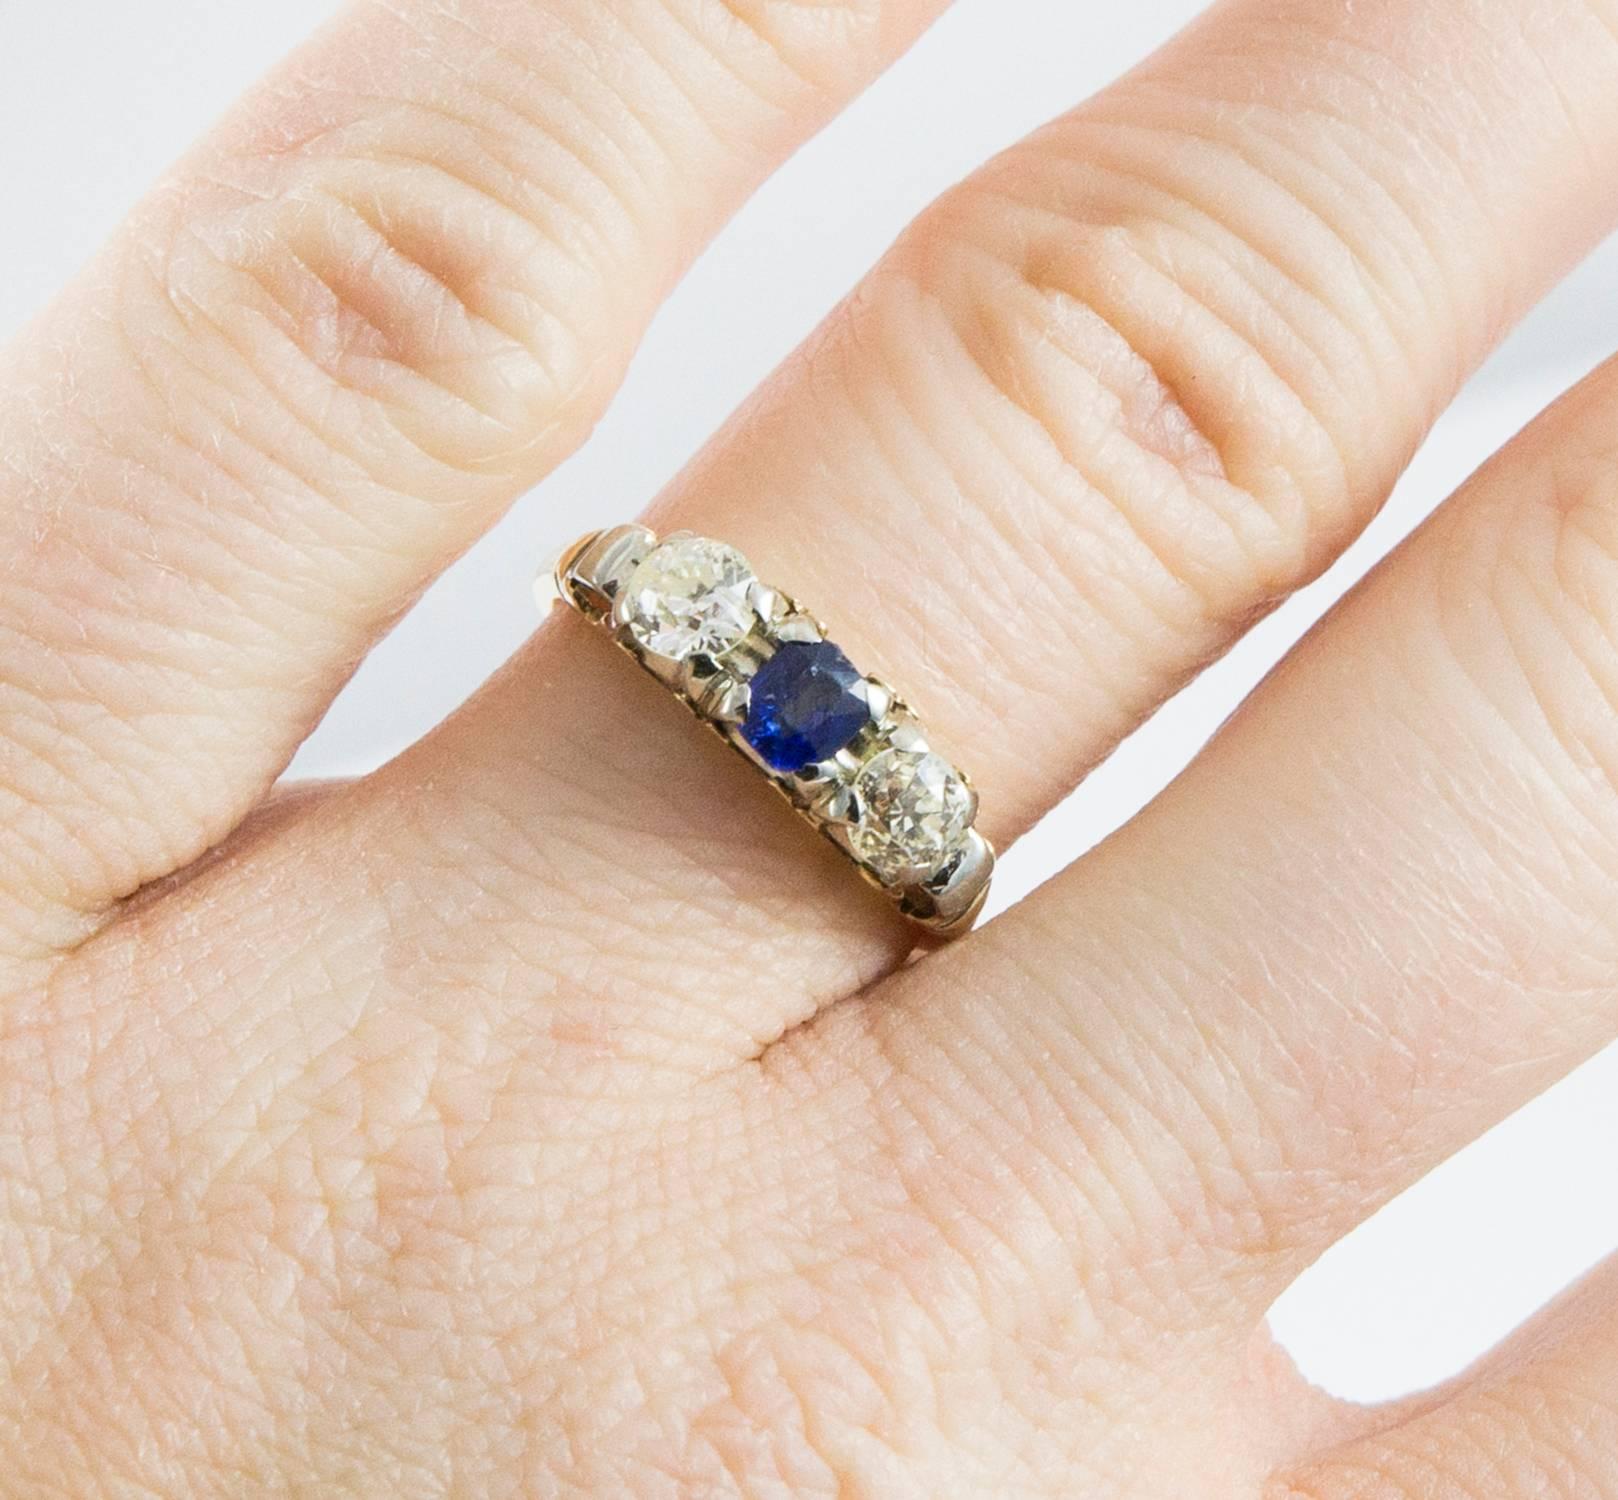 Women's Vintage Gold Diamond and Sapphire Ring For Sale